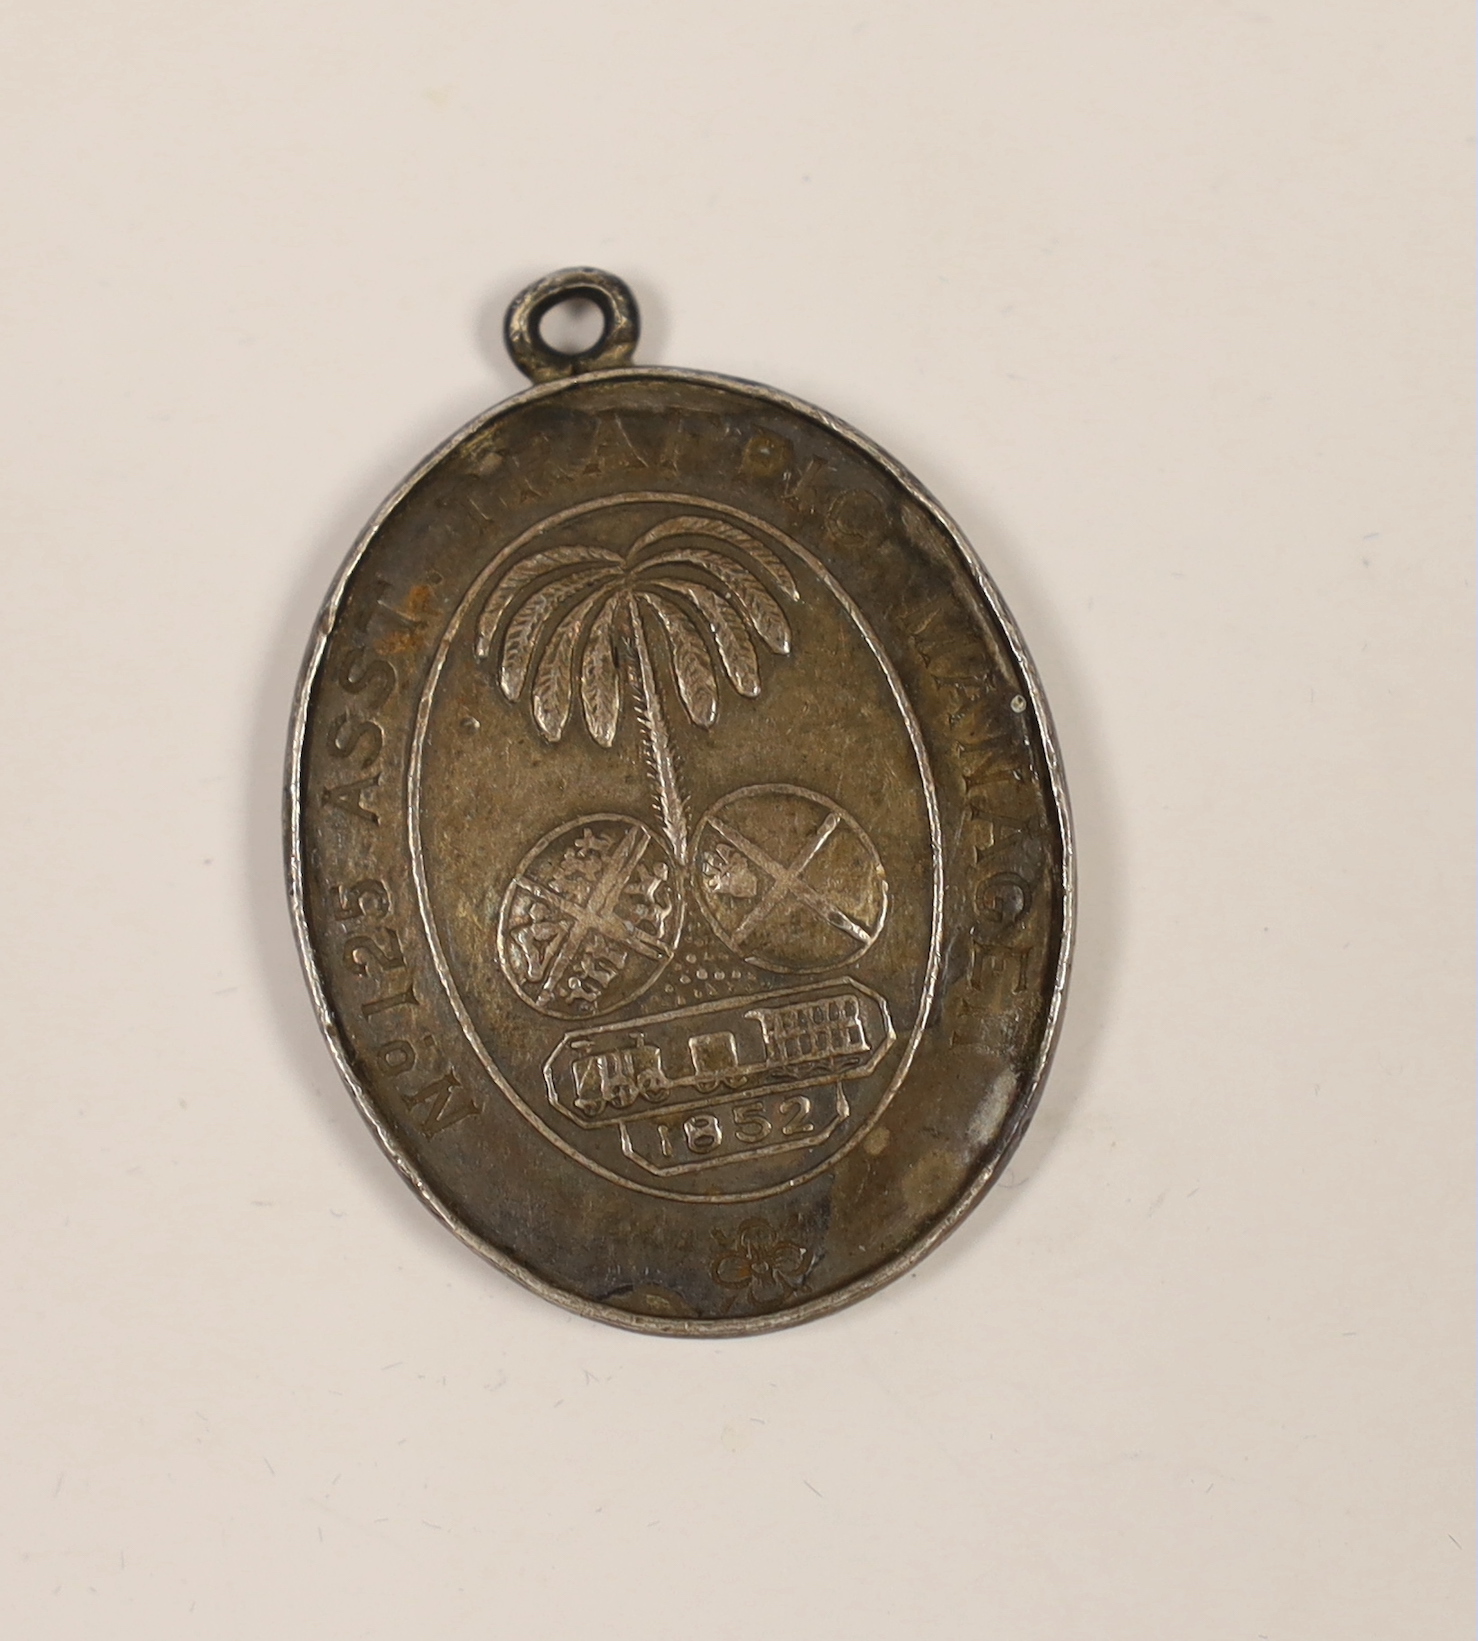 A scarce ‘Madras Railway Company free pass’ medallion, dated 1852, engraved ‘No125 ASST. TRAFFIC MANAGER’